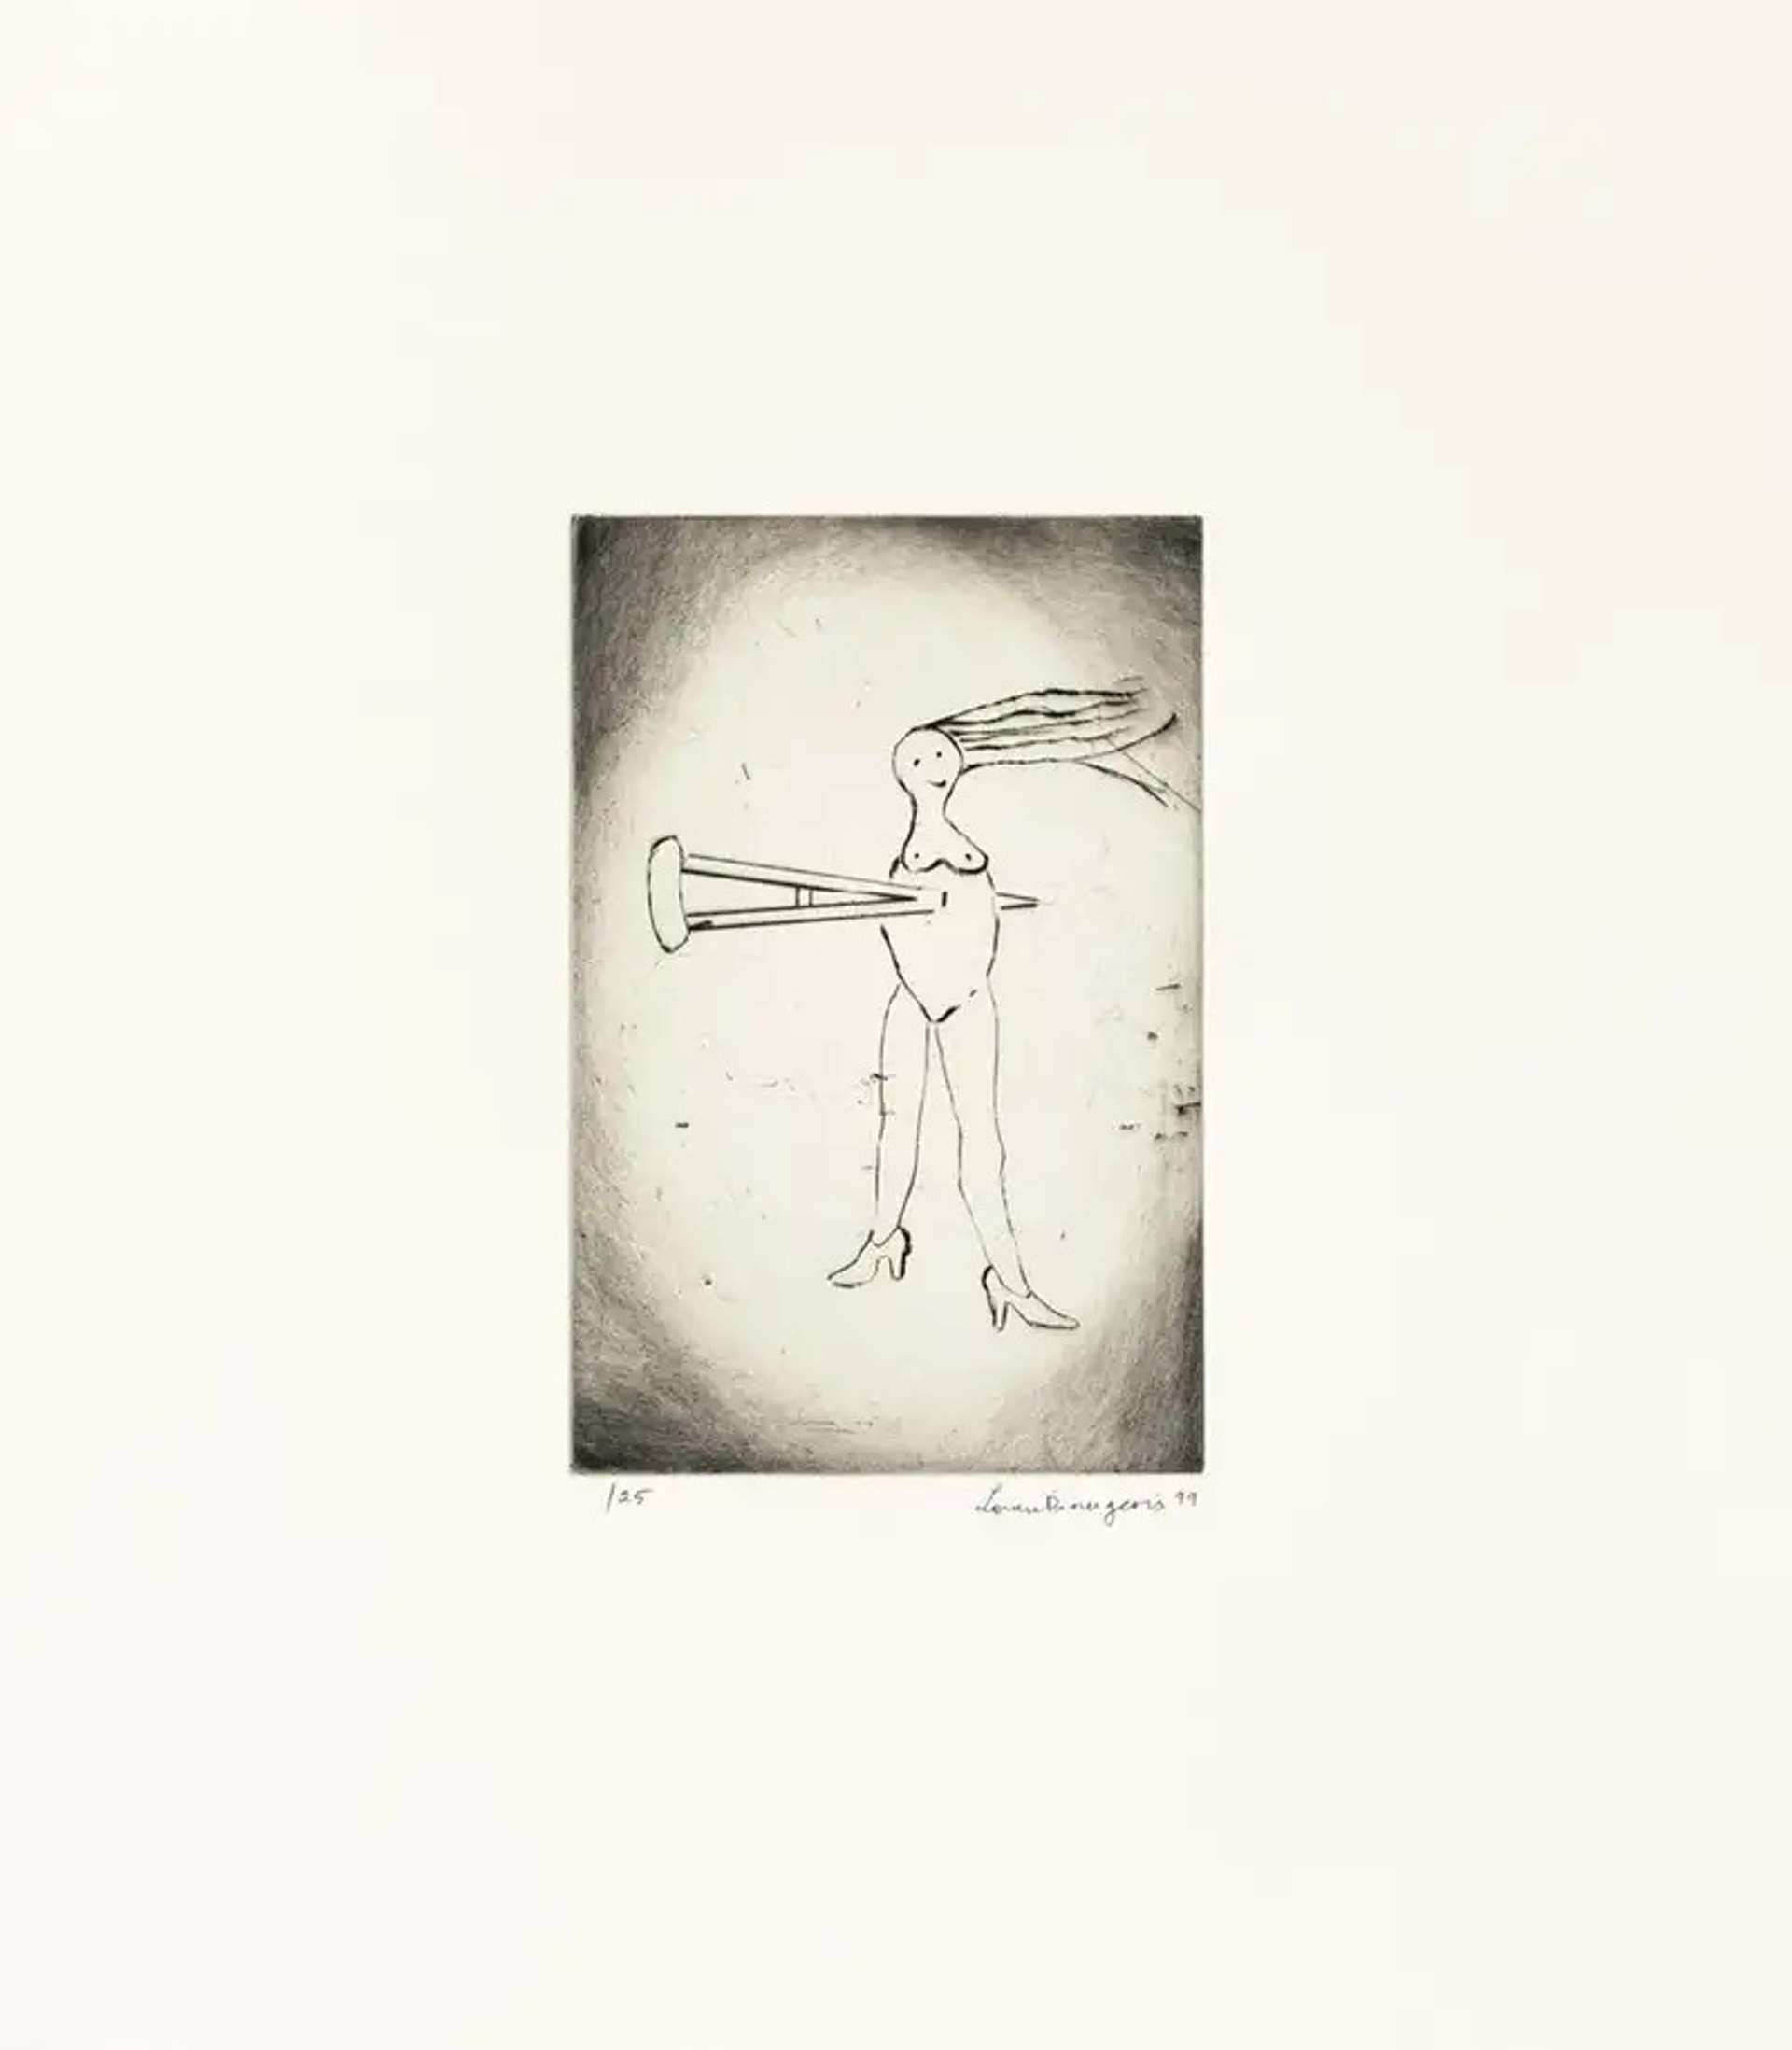 Louise Bourgeois’ The Accident. A drypoint print of a woman standing in heels with a crutch between her torso.